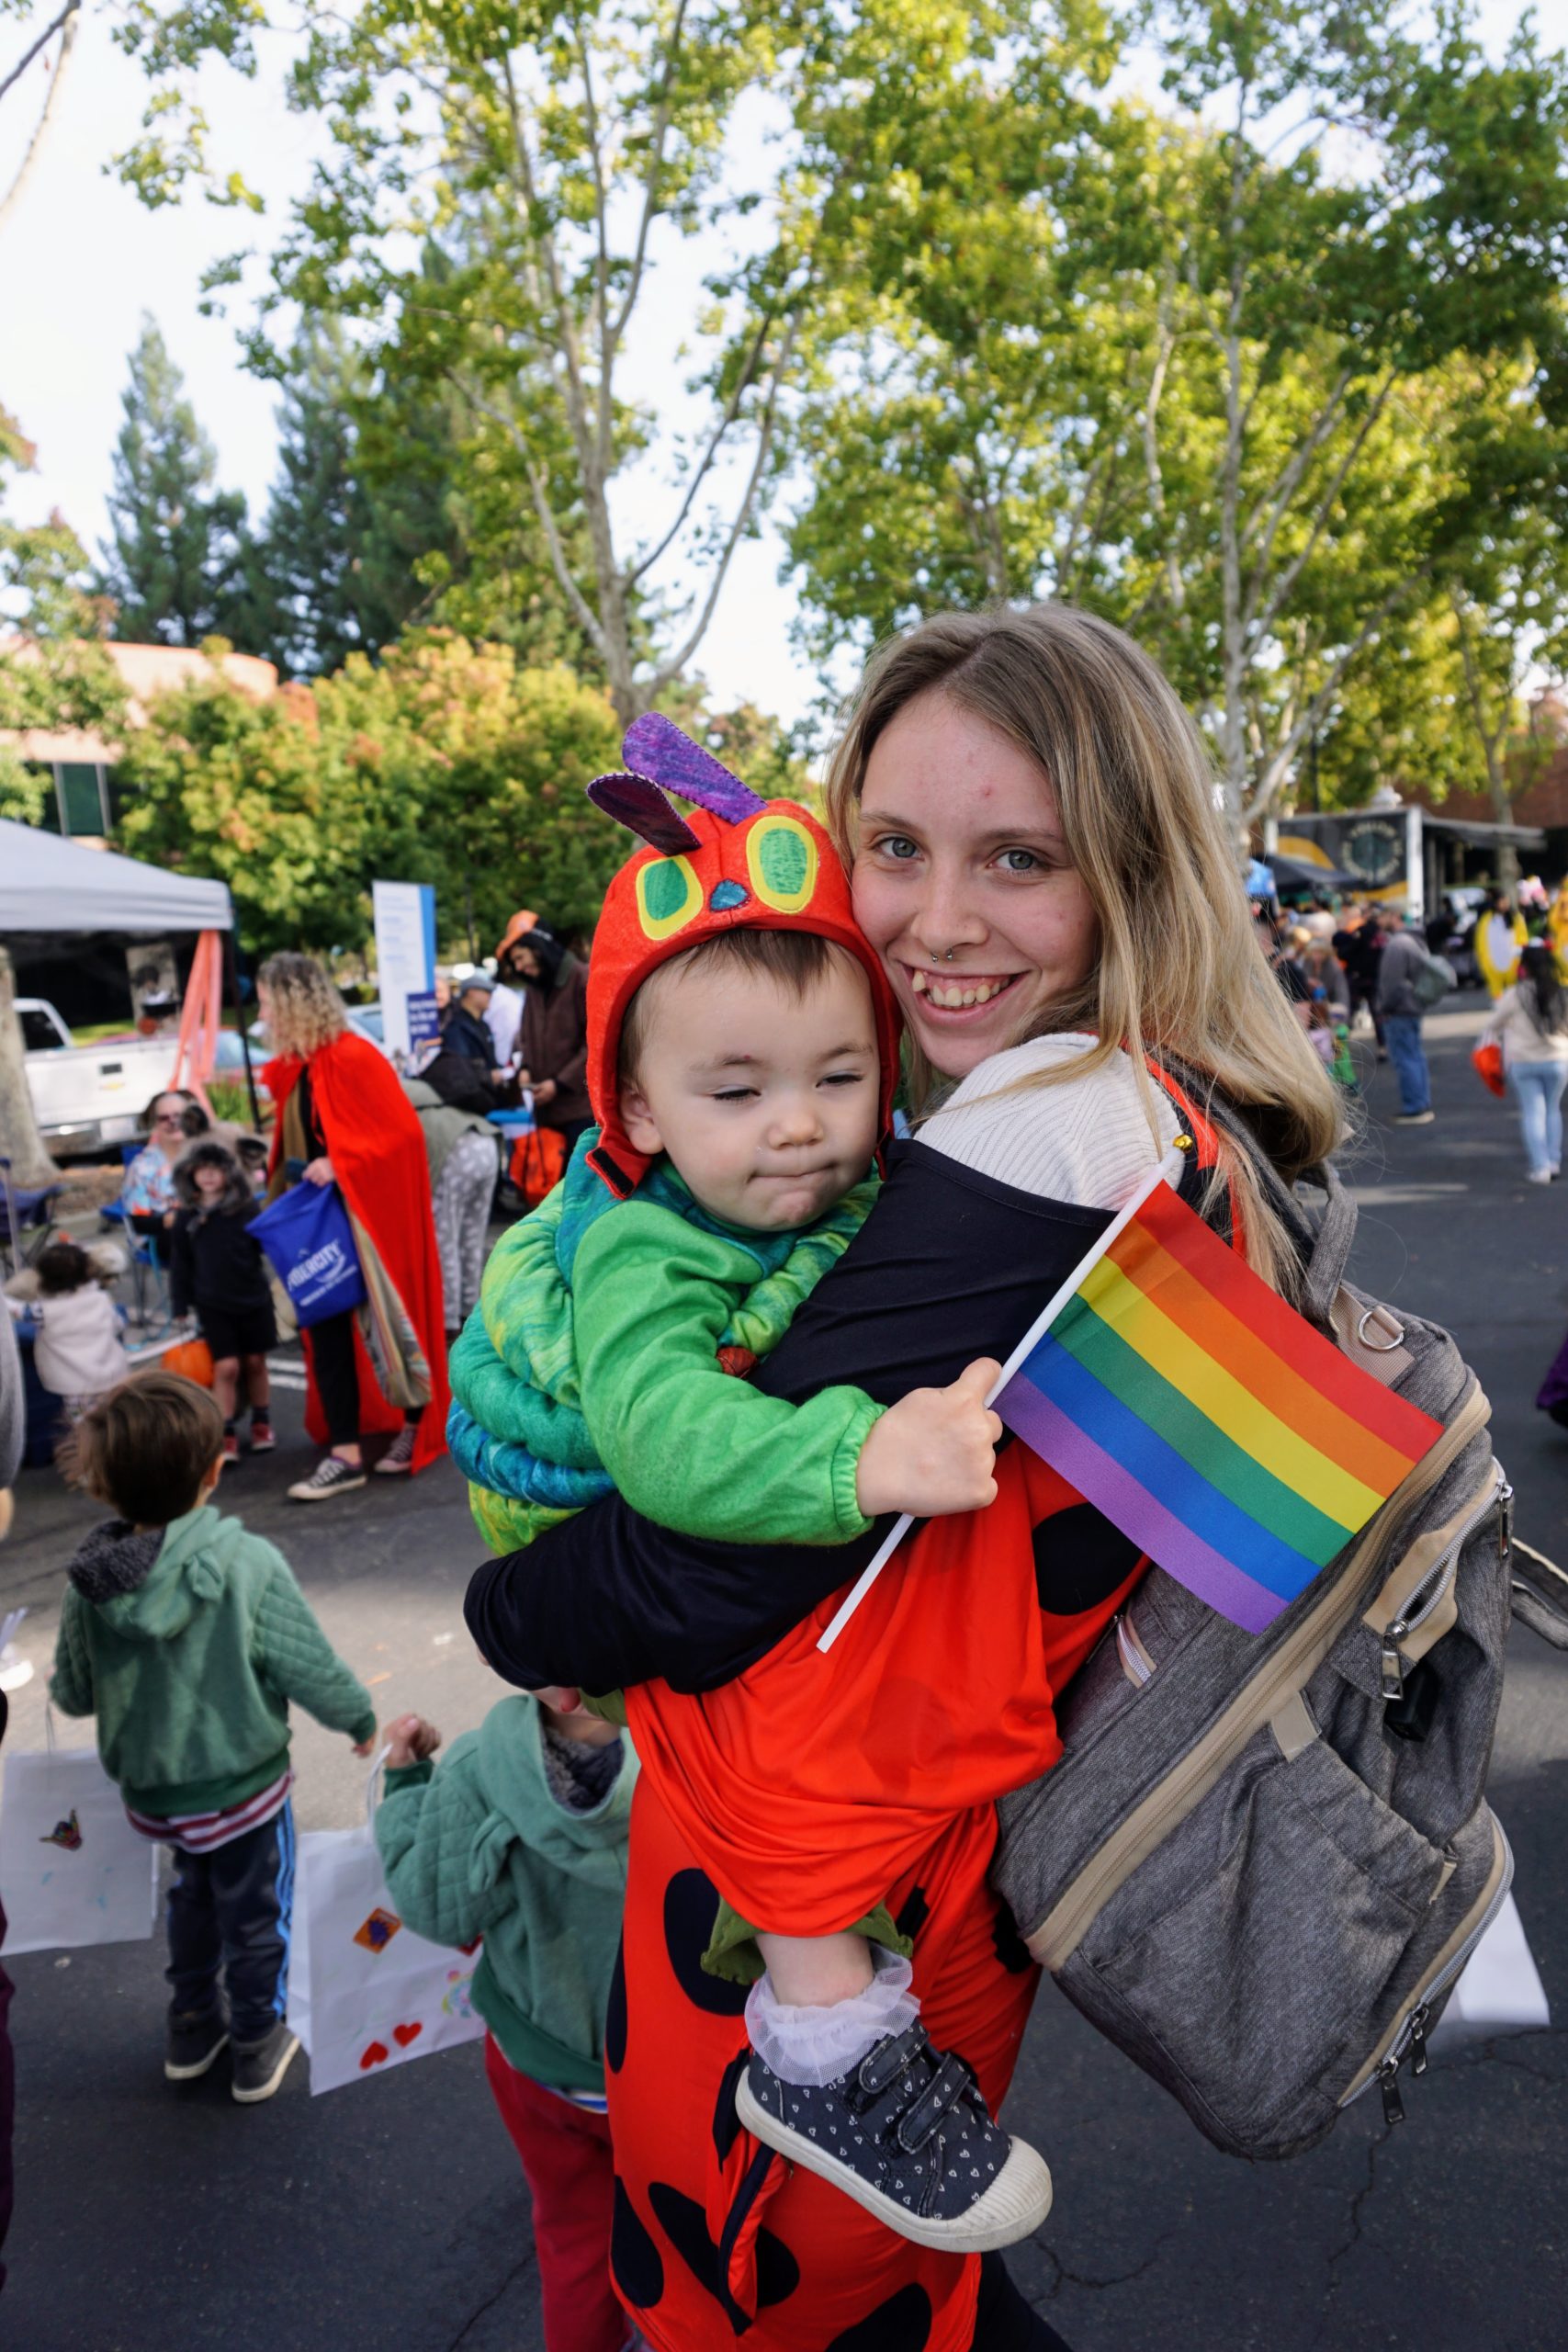 A mother smiles while holding her son, who is dressed as the Very Hungry Caterpillar and is holding a Pride flag